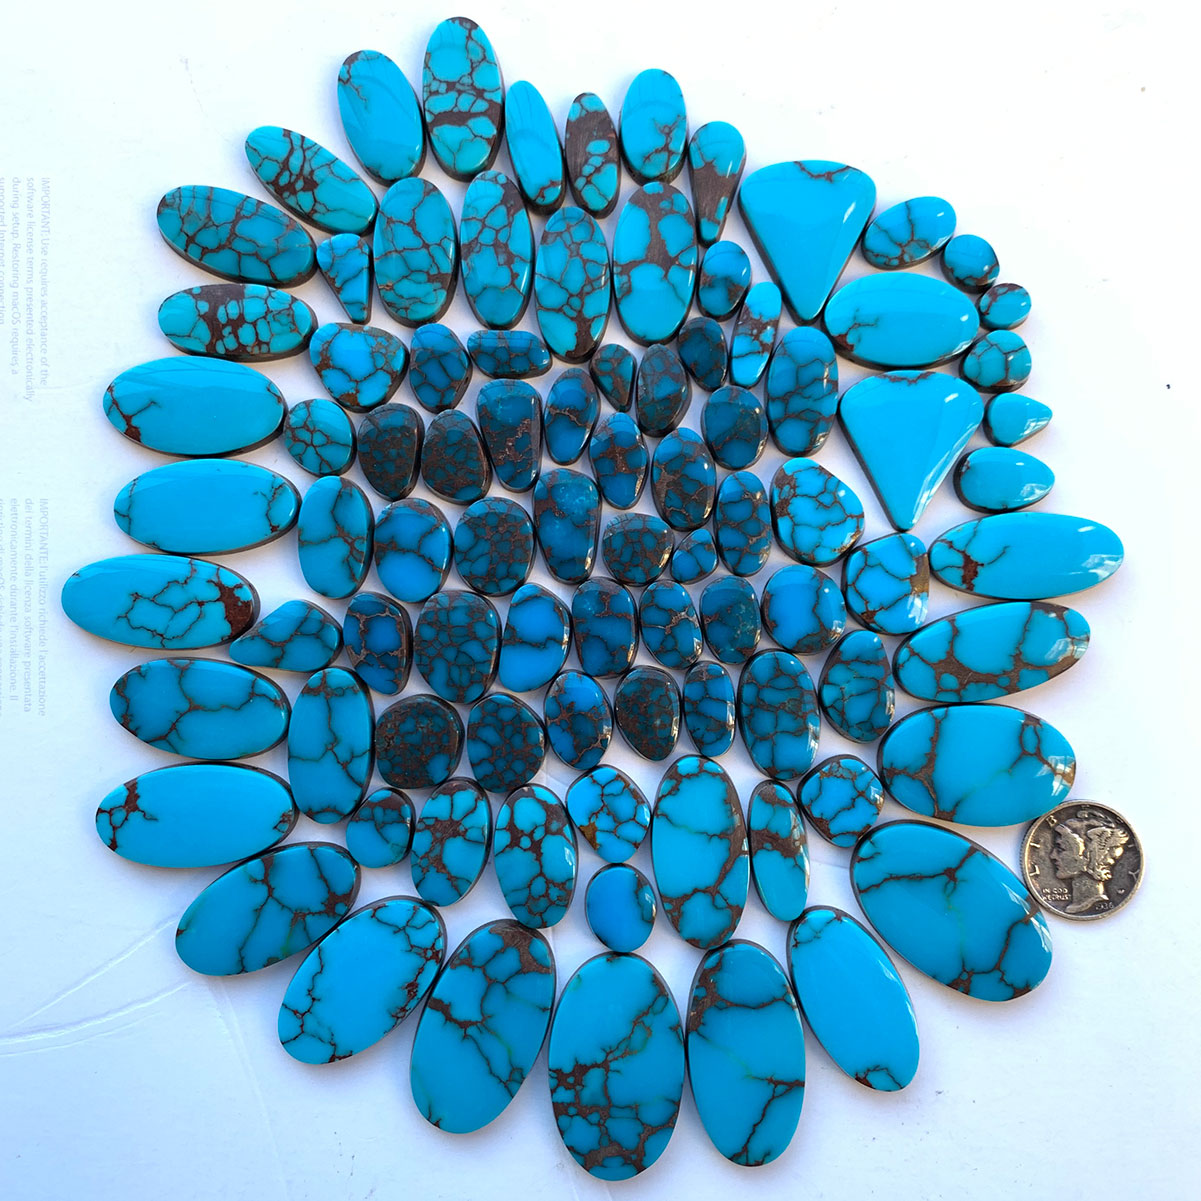 Synthetic Turquoise with Matrix Half Moon Beads Pack of 7 - Turquoise Multi  - Trims By The Yard